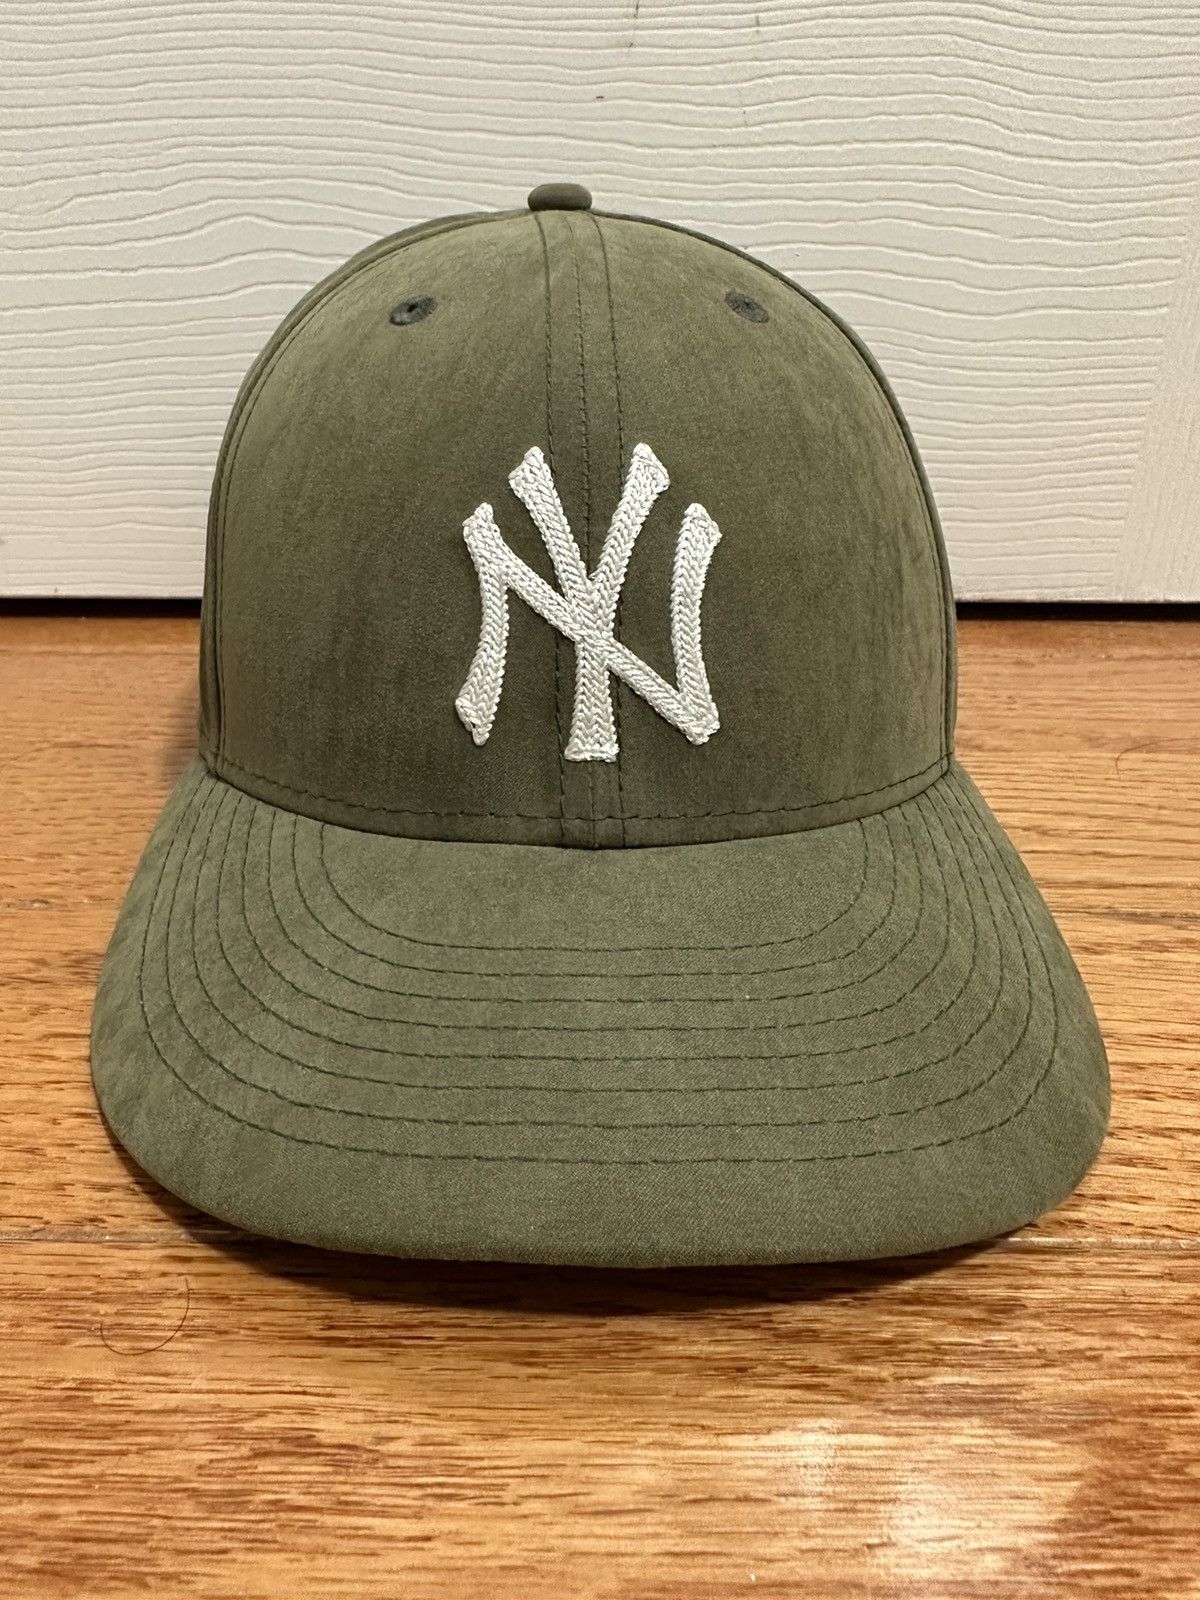 New Era ALD Chain Stitched Yankees Fitted Cap 7 1/2 | Grailed